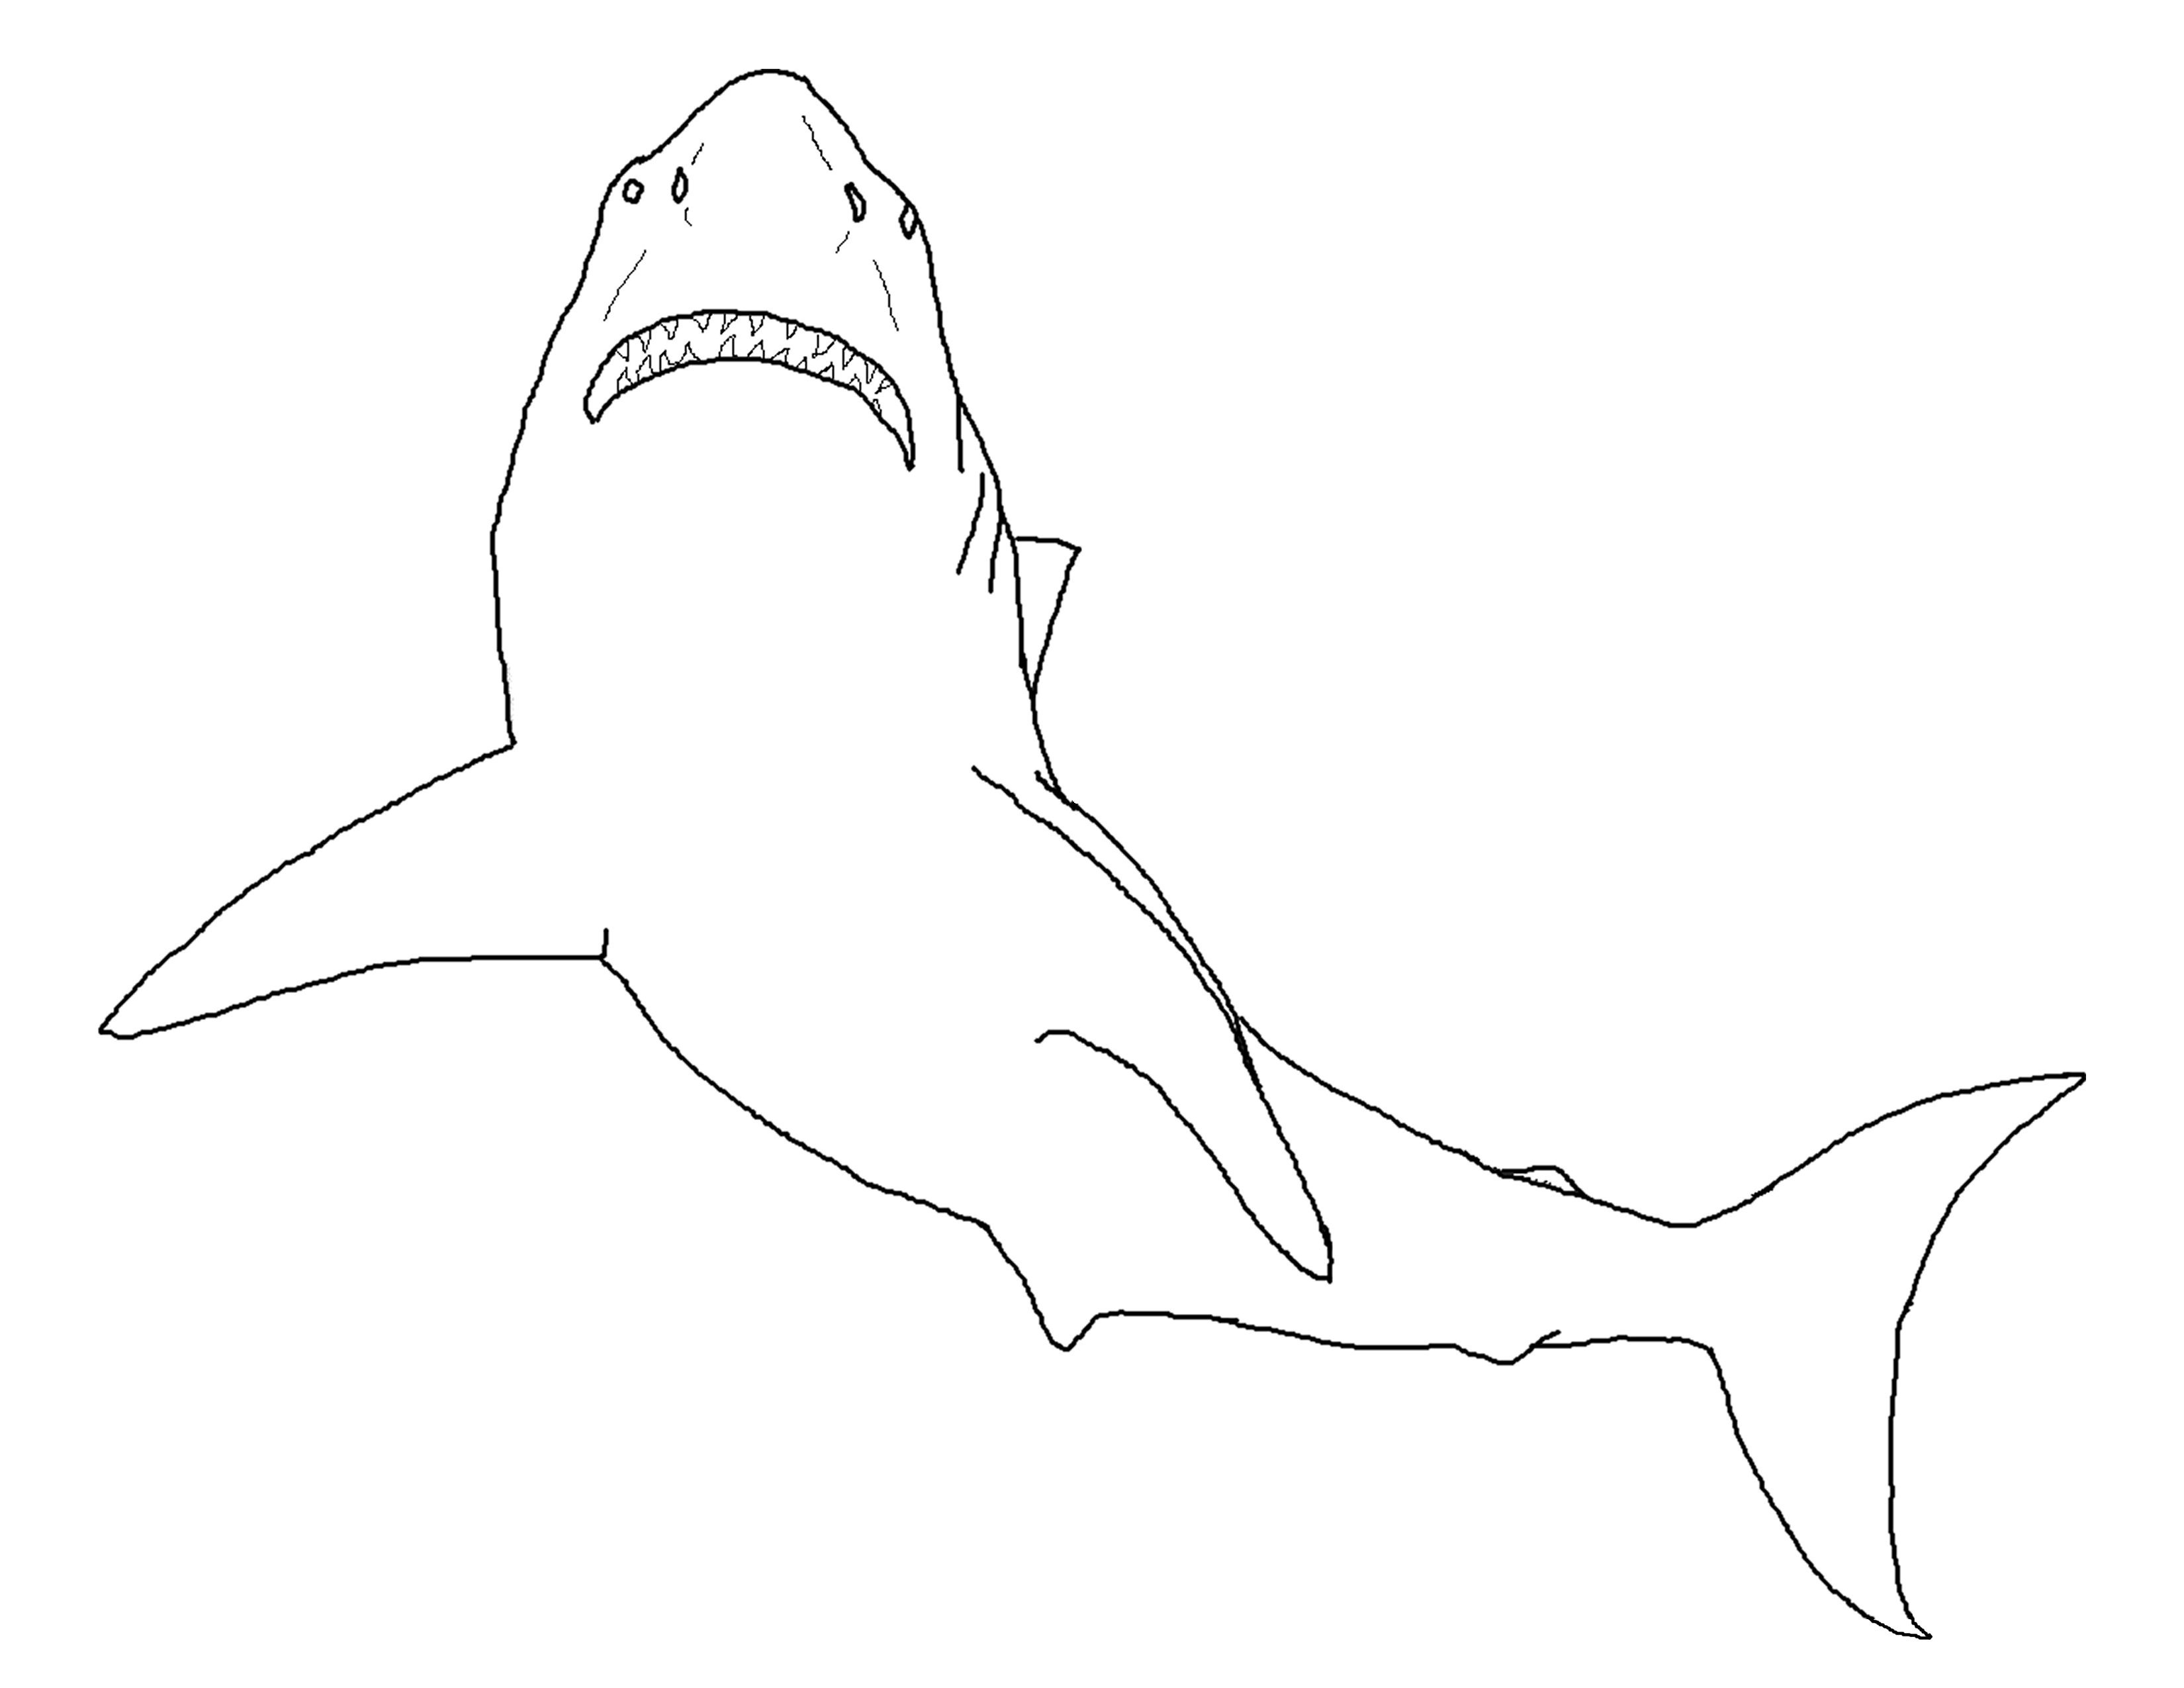 free-printable-shark-coloring-pages-for-kids